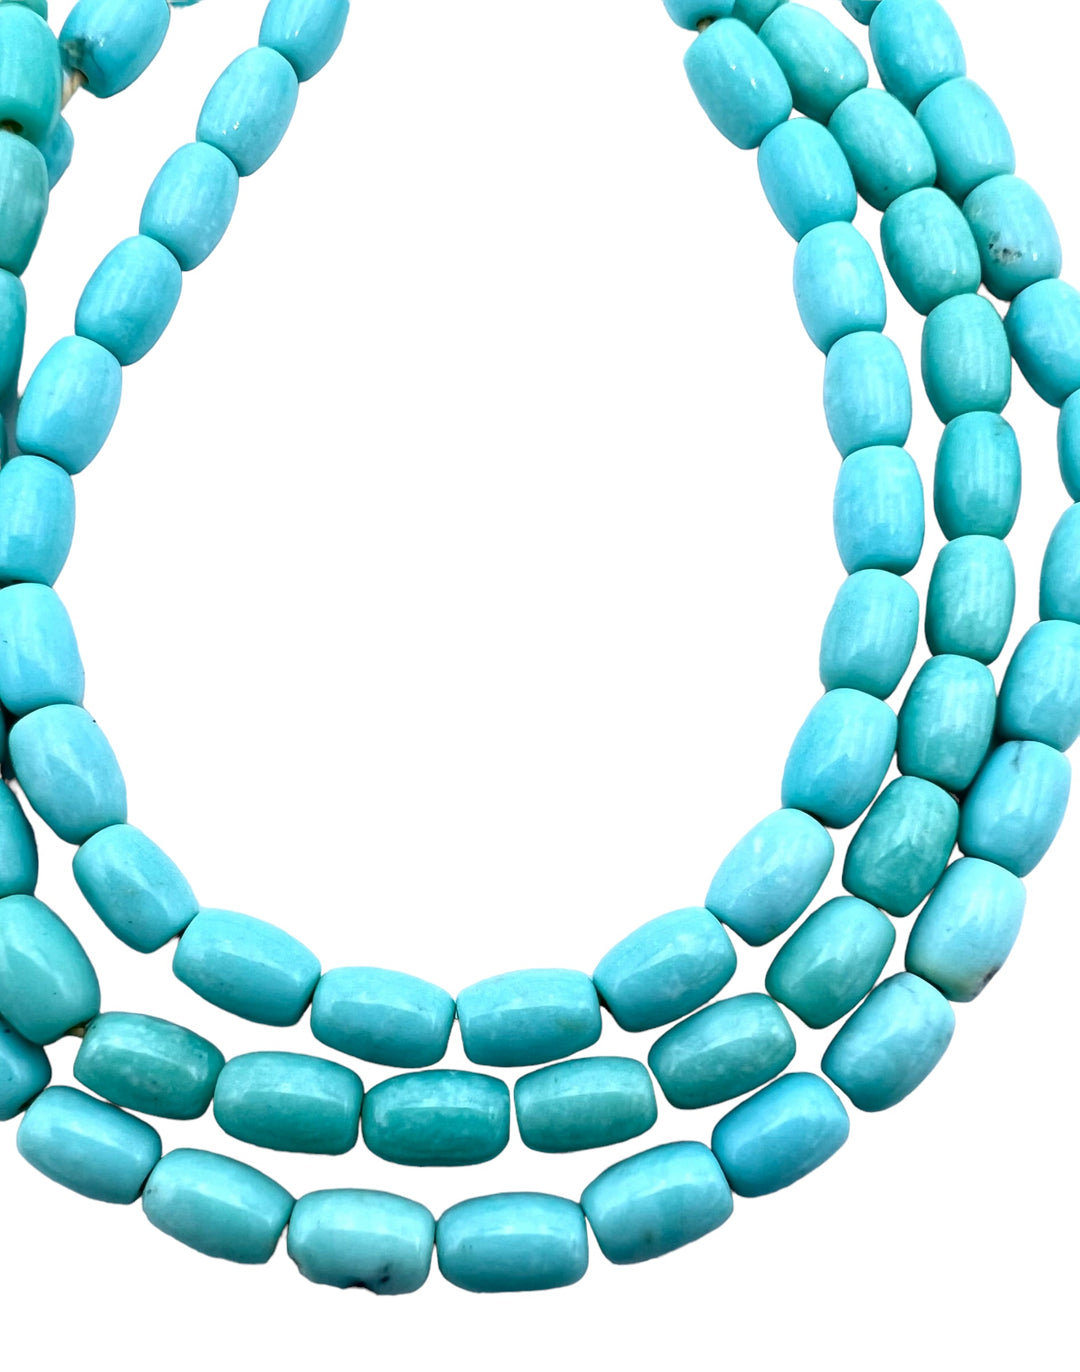 Natural Campitos (Mex) Turquoise 4x6mm Barrel Beads (9 inch